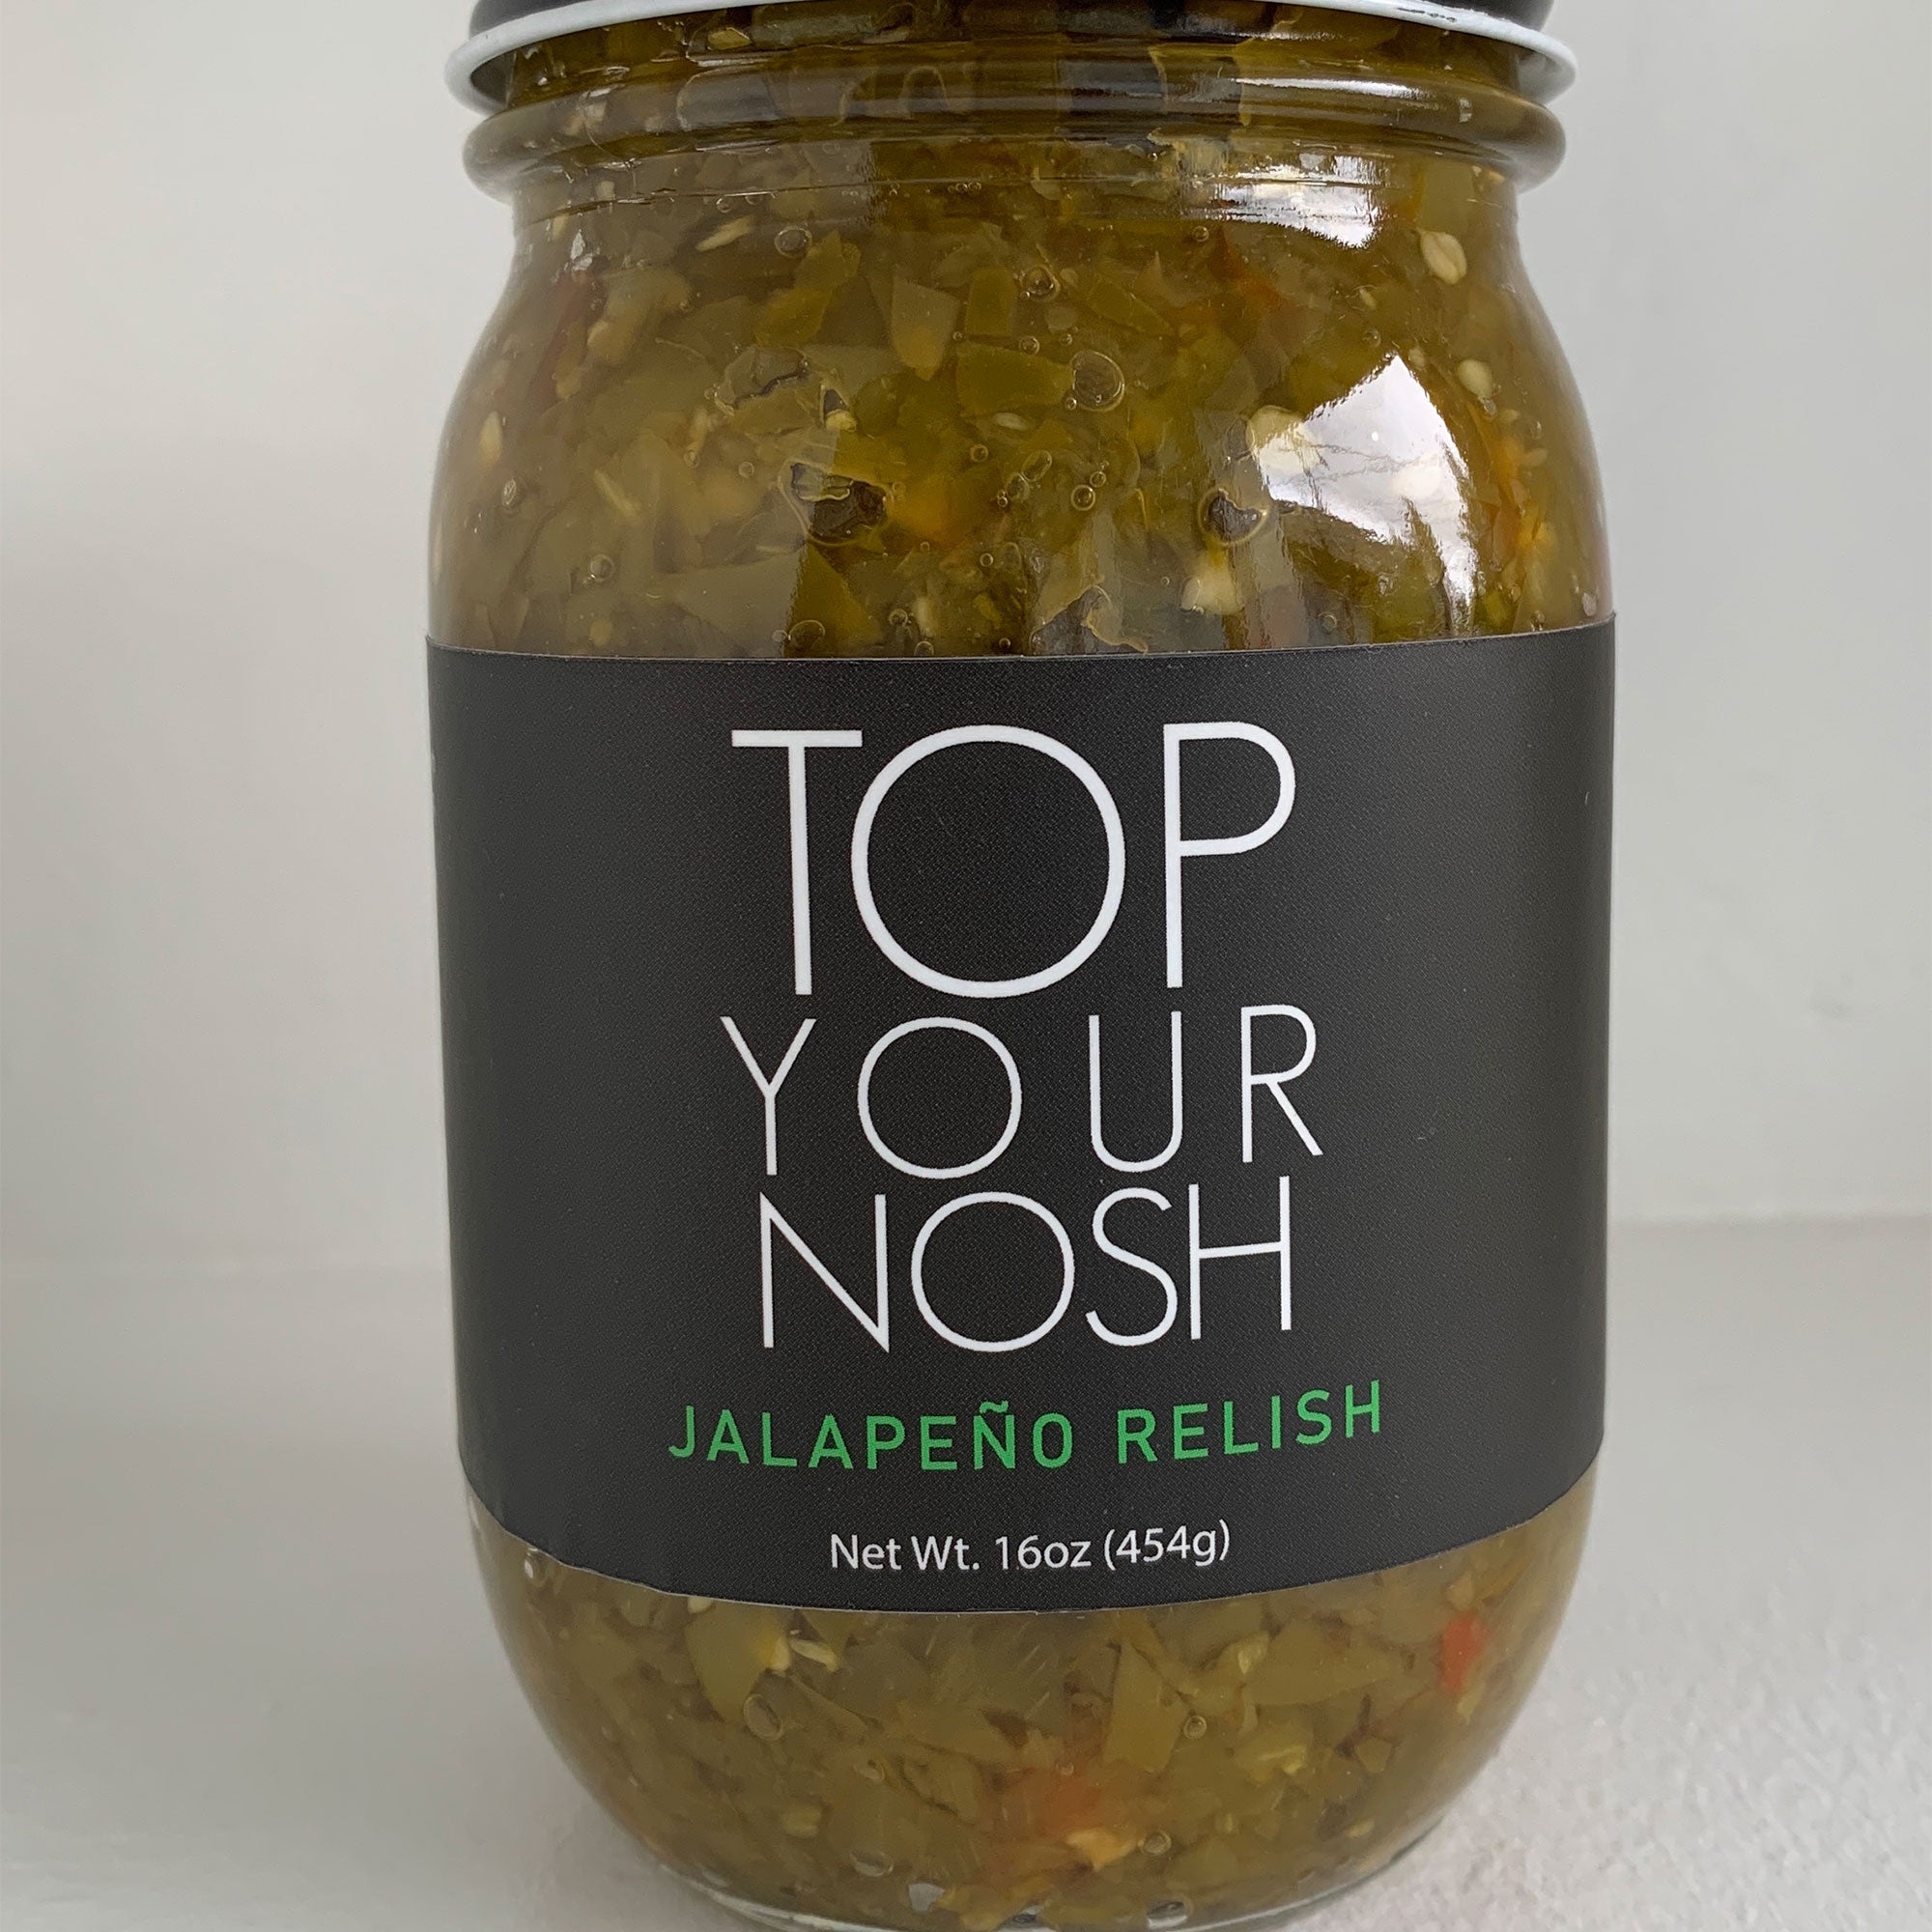 Jalapeno Relish from Top Your Nosh | Relish and Salsa Specialty Products